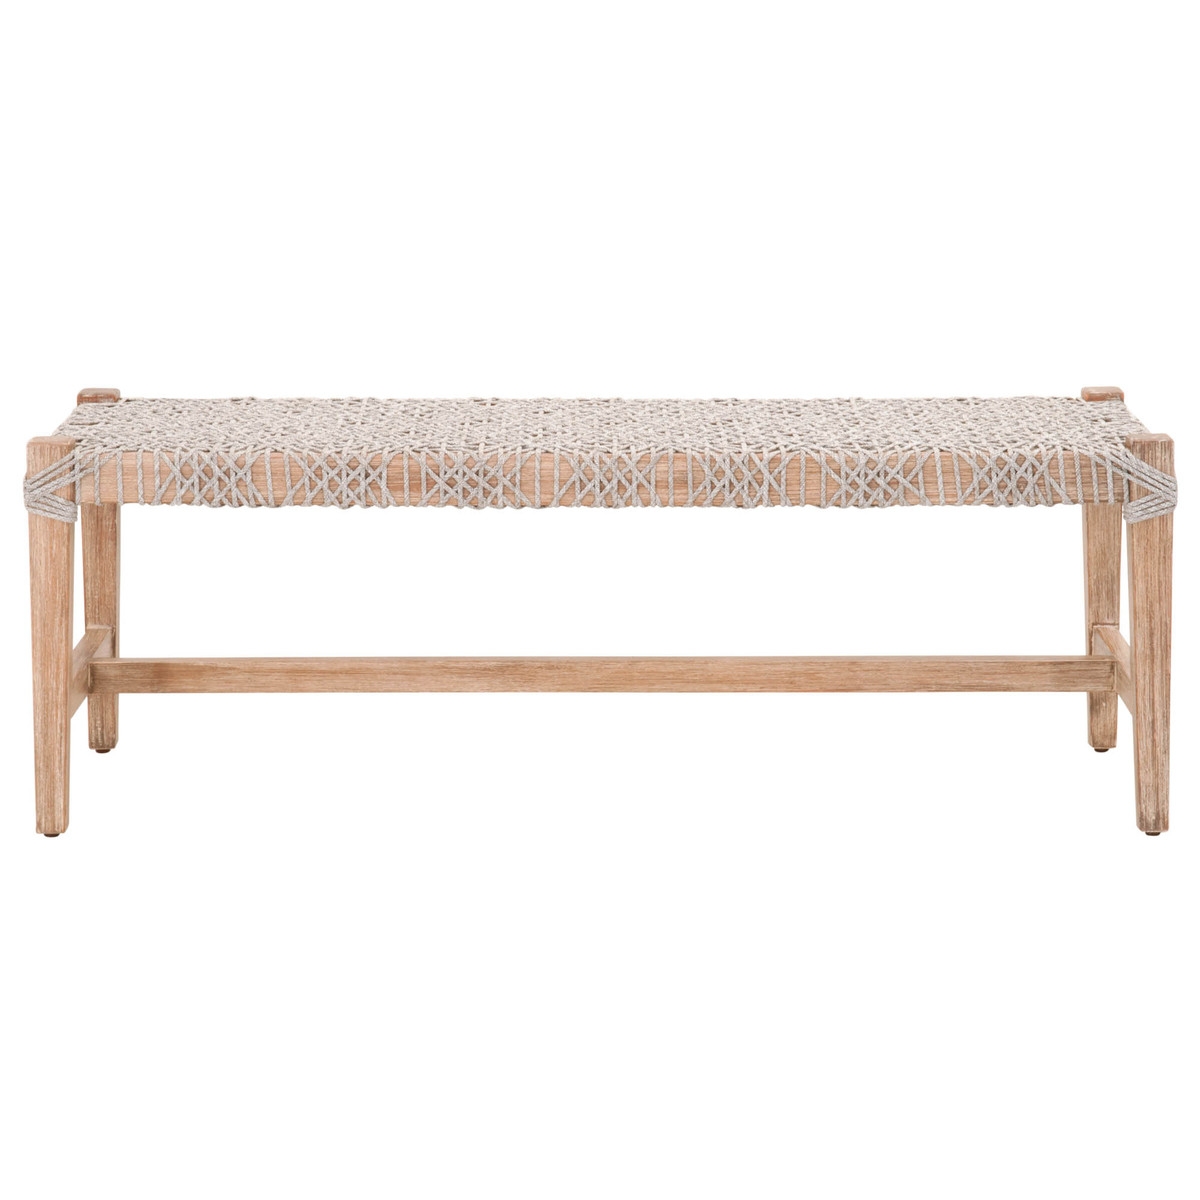 Costa Bench, Taupe & White - Image 2